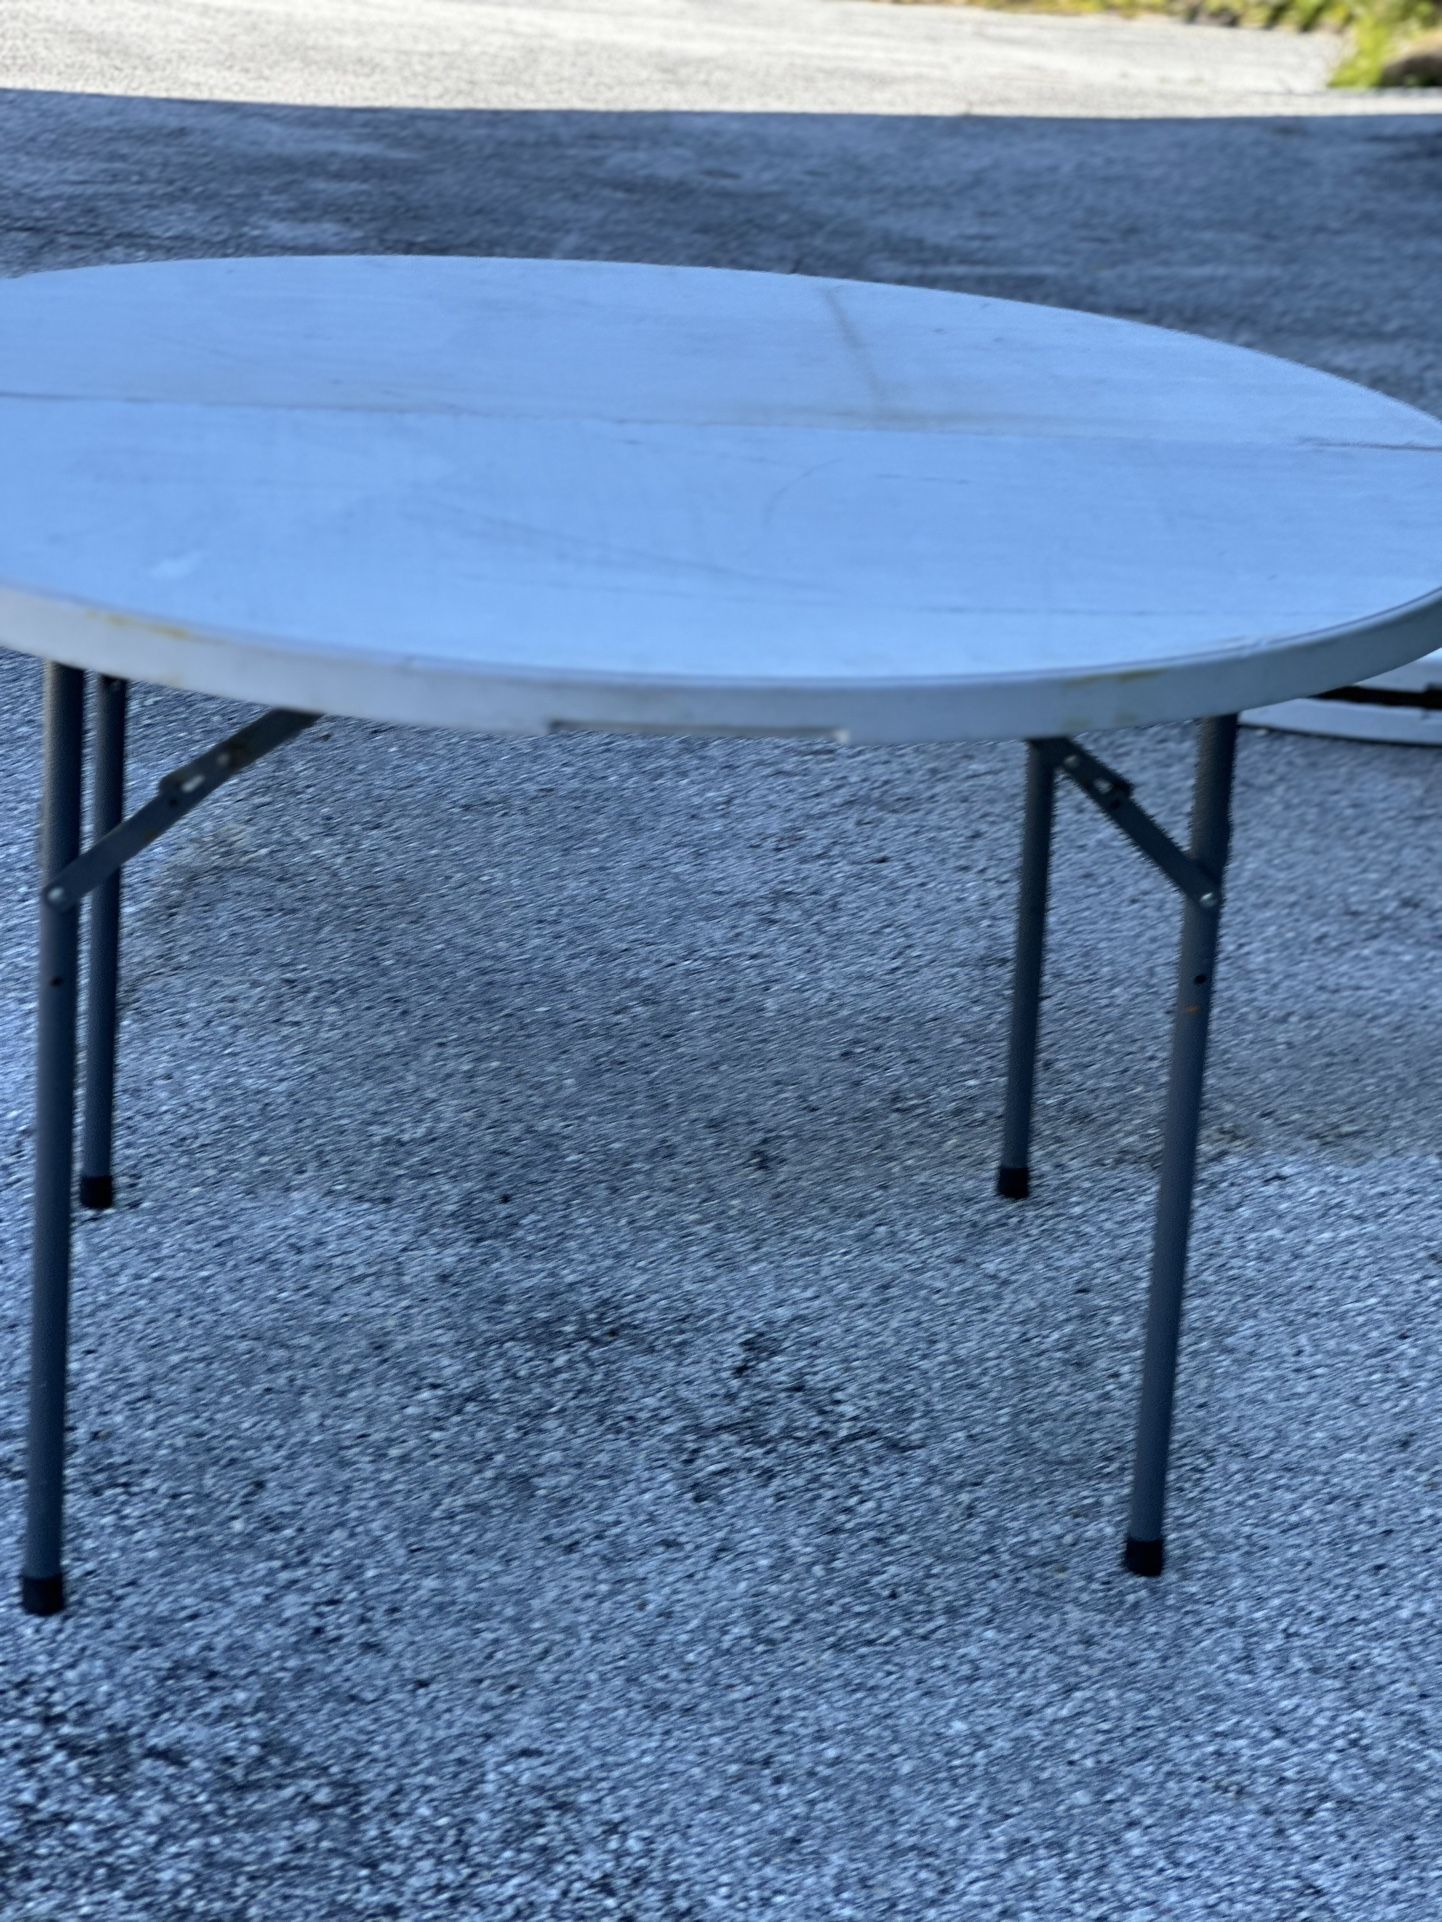 4 Foot Round Plastic Tables